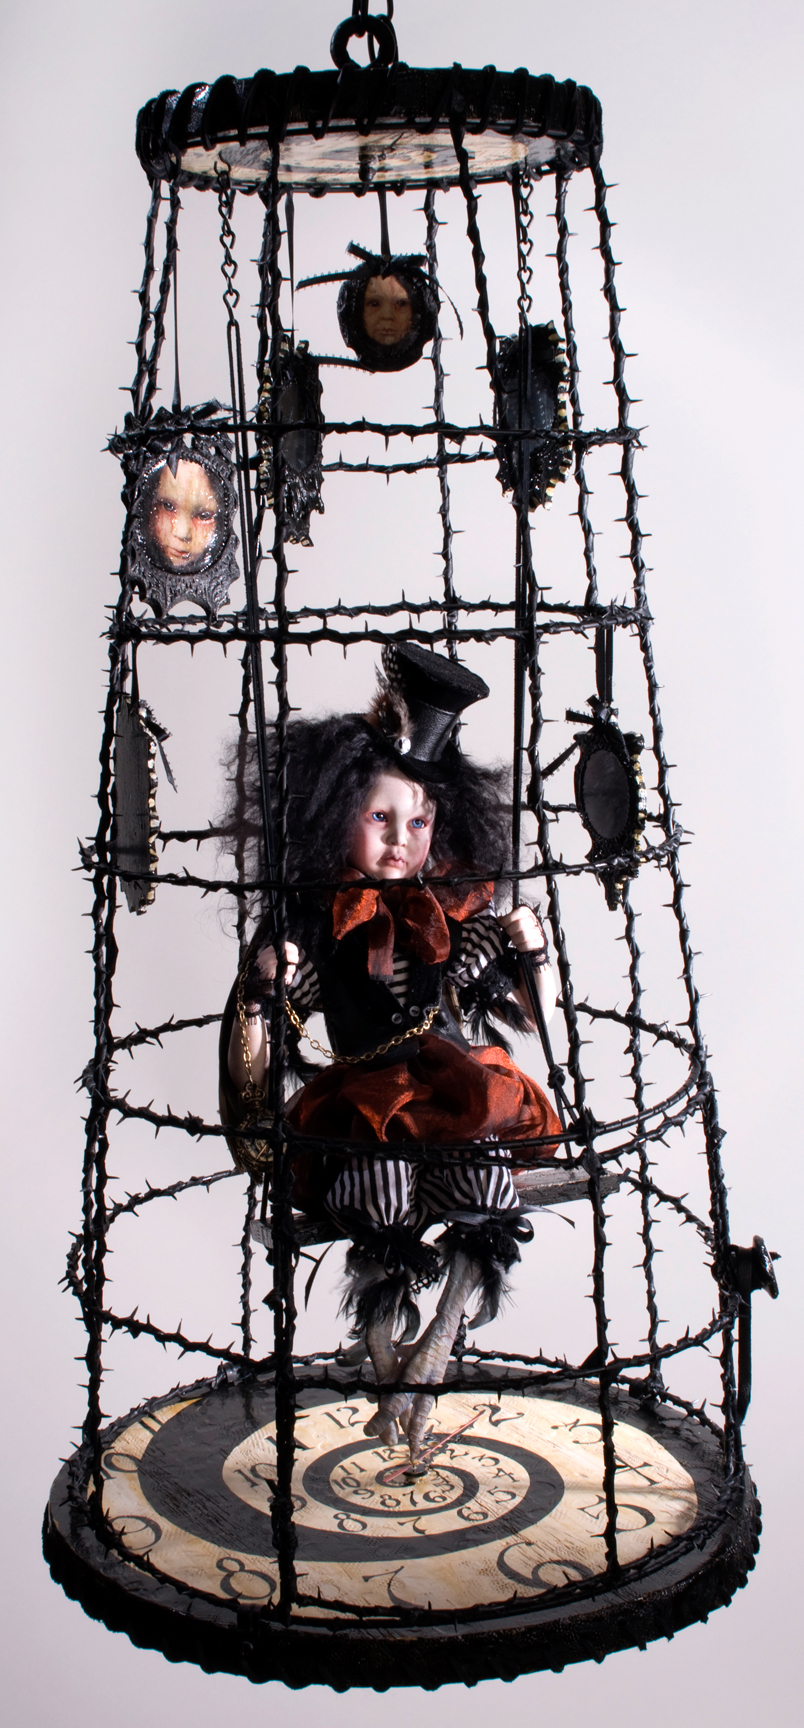 gothic artdoll wearing black tophat with black hair taxidermied bird feet suspended in a cage with a hand-painted clock spiral base in a thorny black birdcage surrounded by gothic portraits of himself